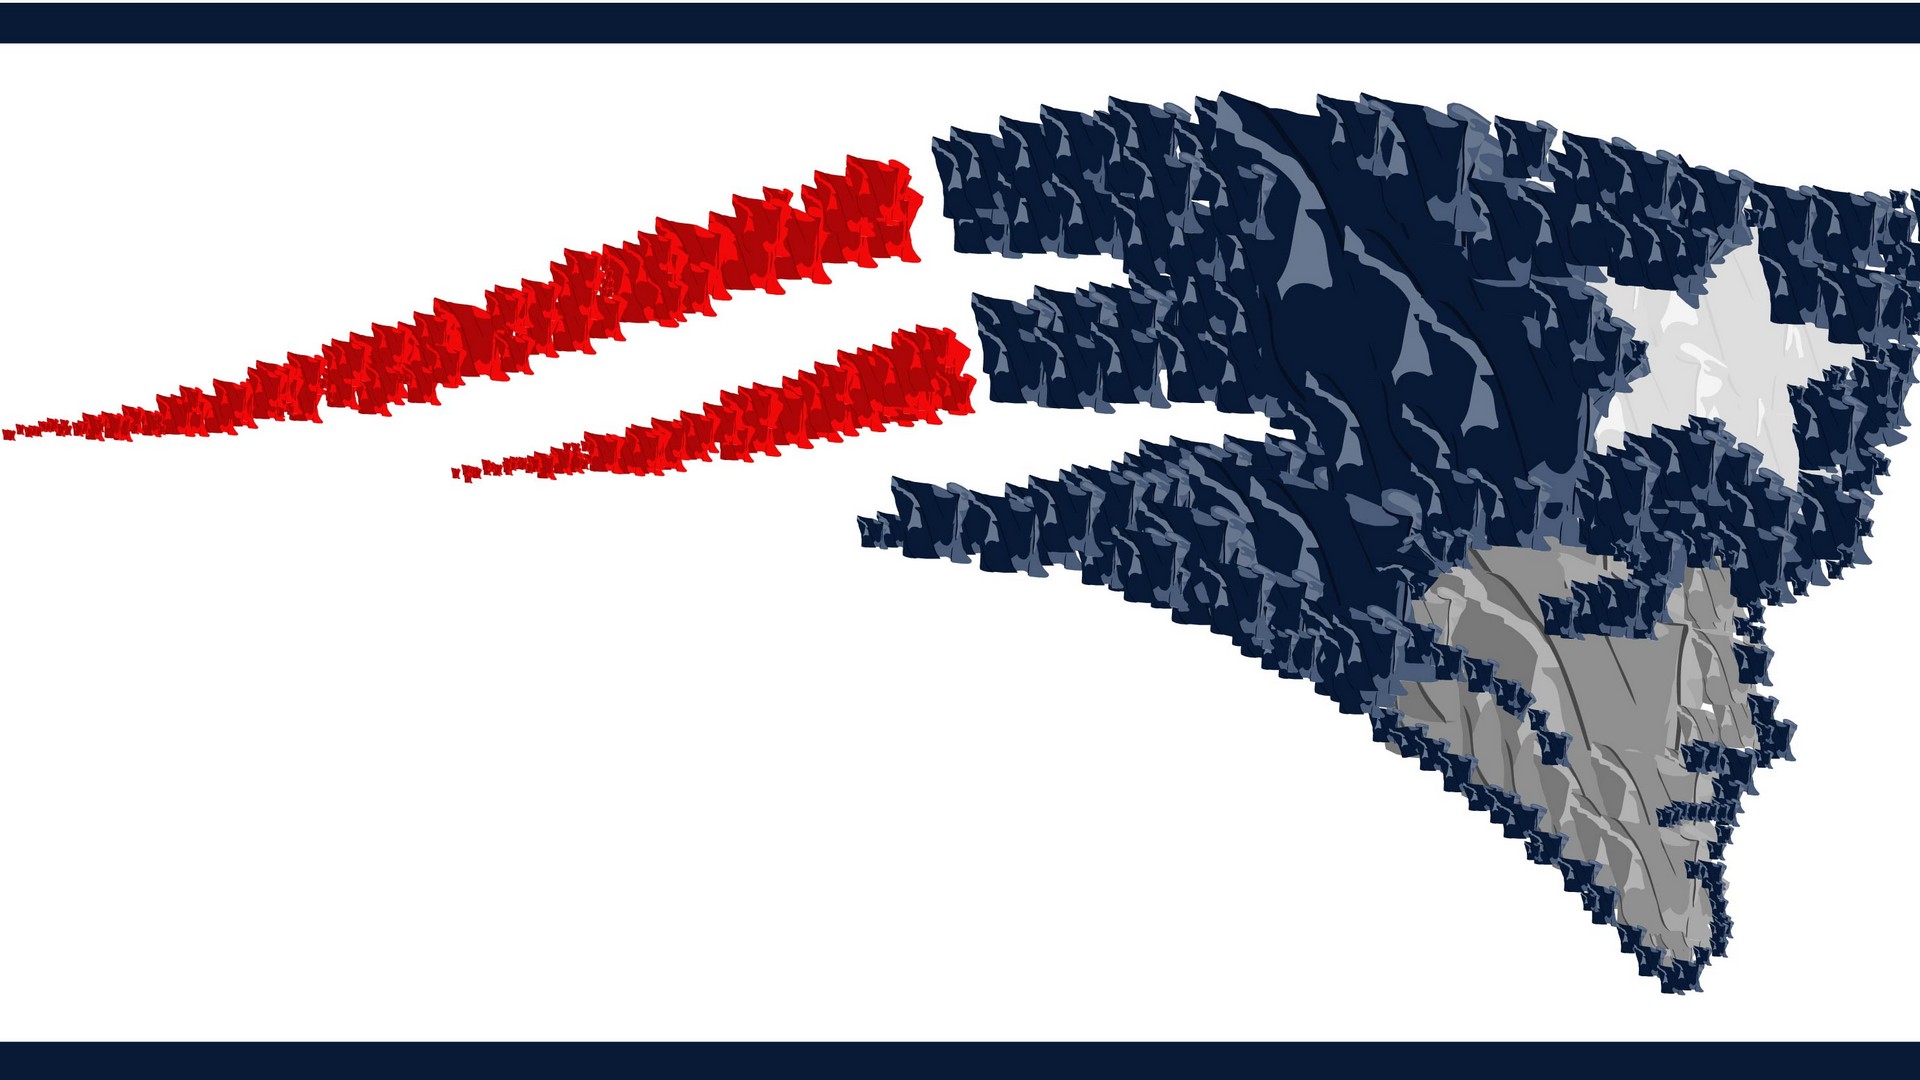 NE Patriots Wallpaper For Mac with resolution 1920x1080 pixel. You can make this wallpaper for your Mac or Windows Desktop Background, iPhone, Android or Tablet and another Smartphone device